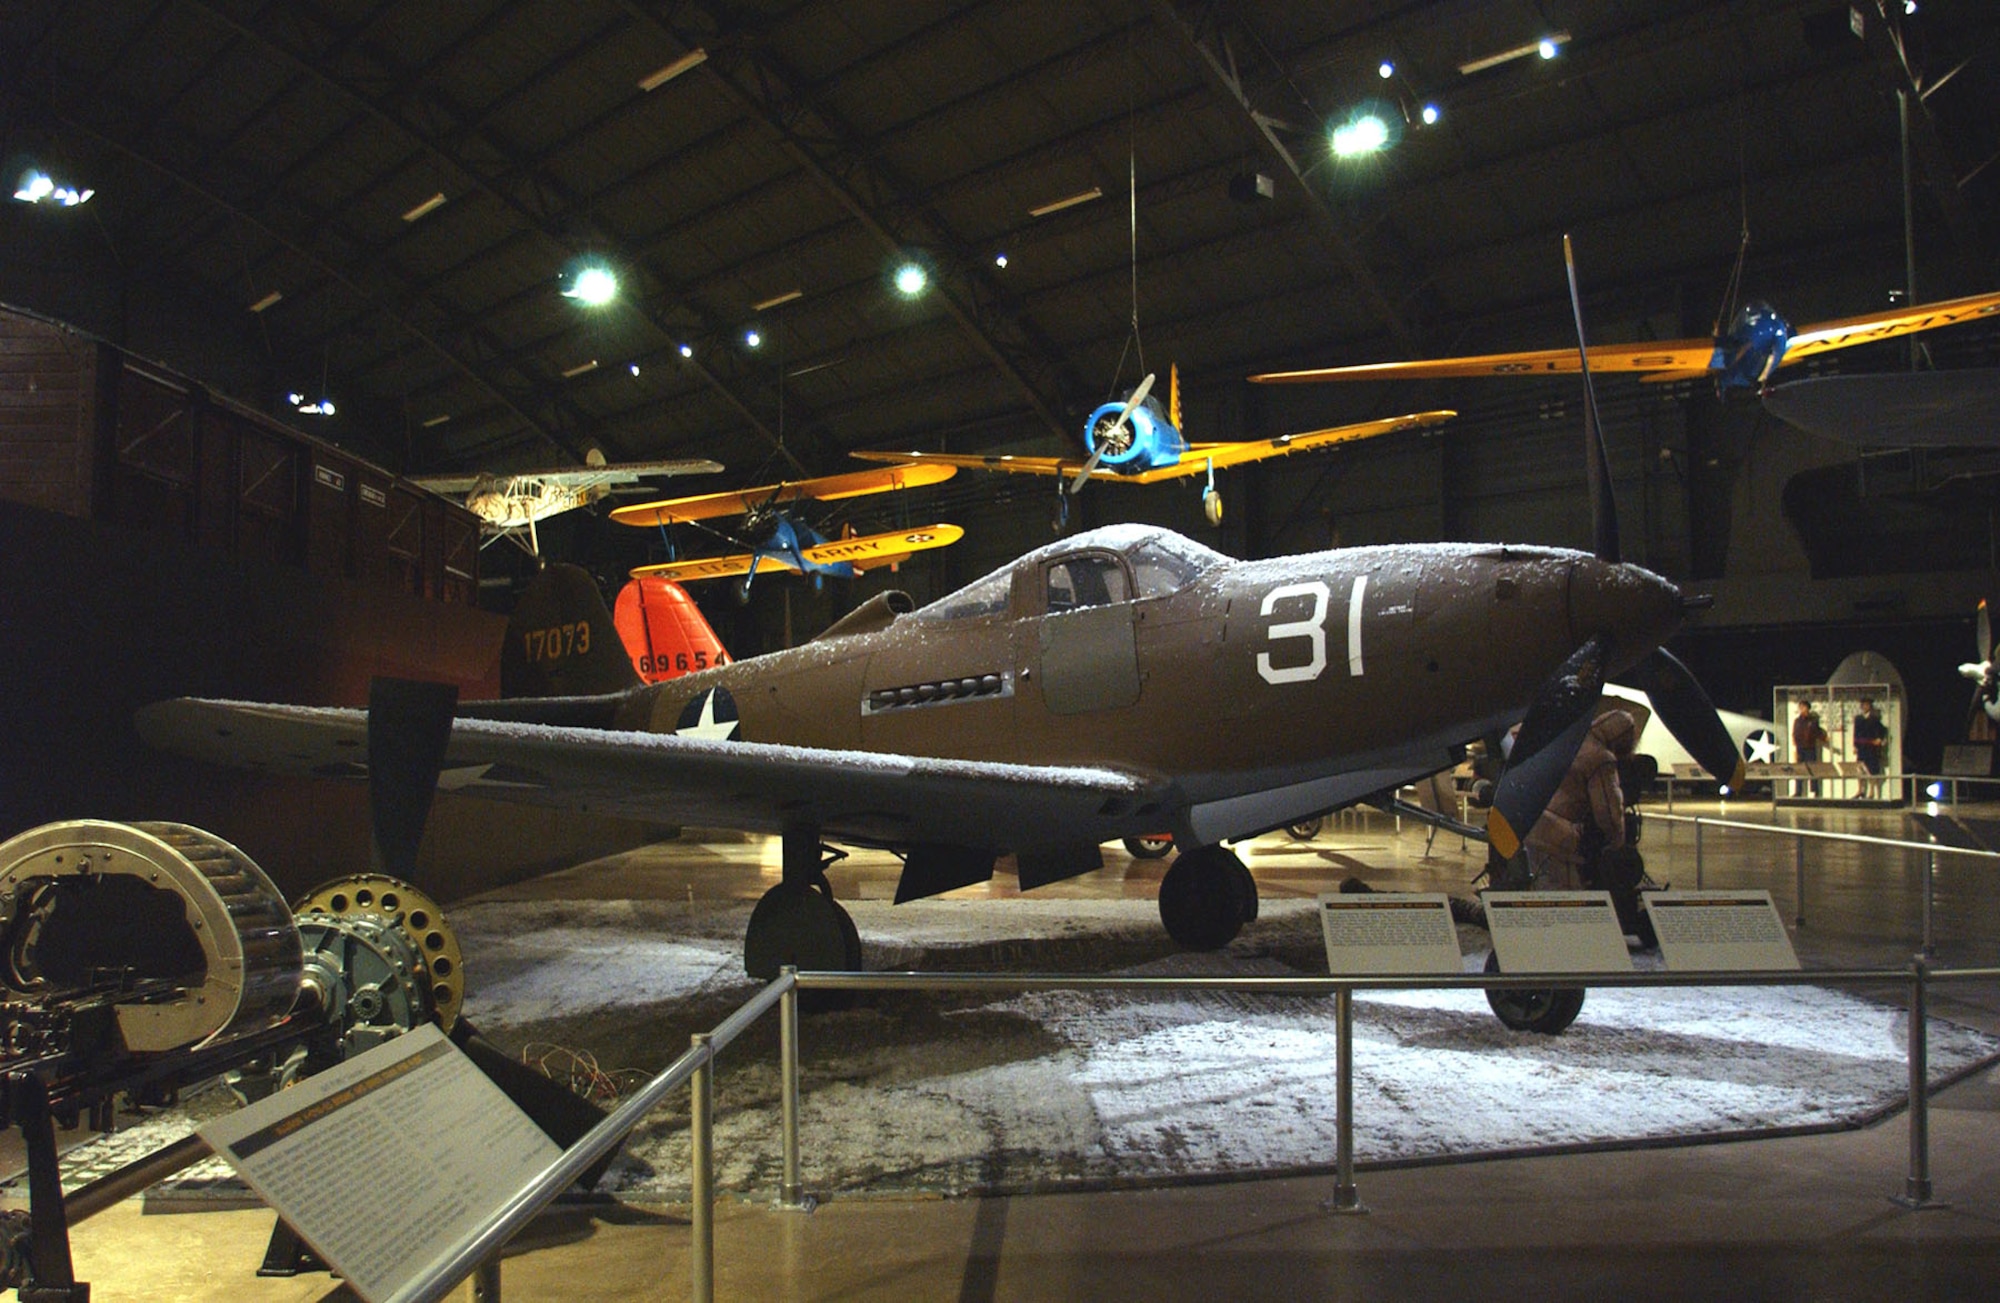 DAYTON, Ohio -- Bell P-39Q Airacobra in the World War II Gallery at the National Museum of the U.S. Air Force. (U.S. Air Force photo)